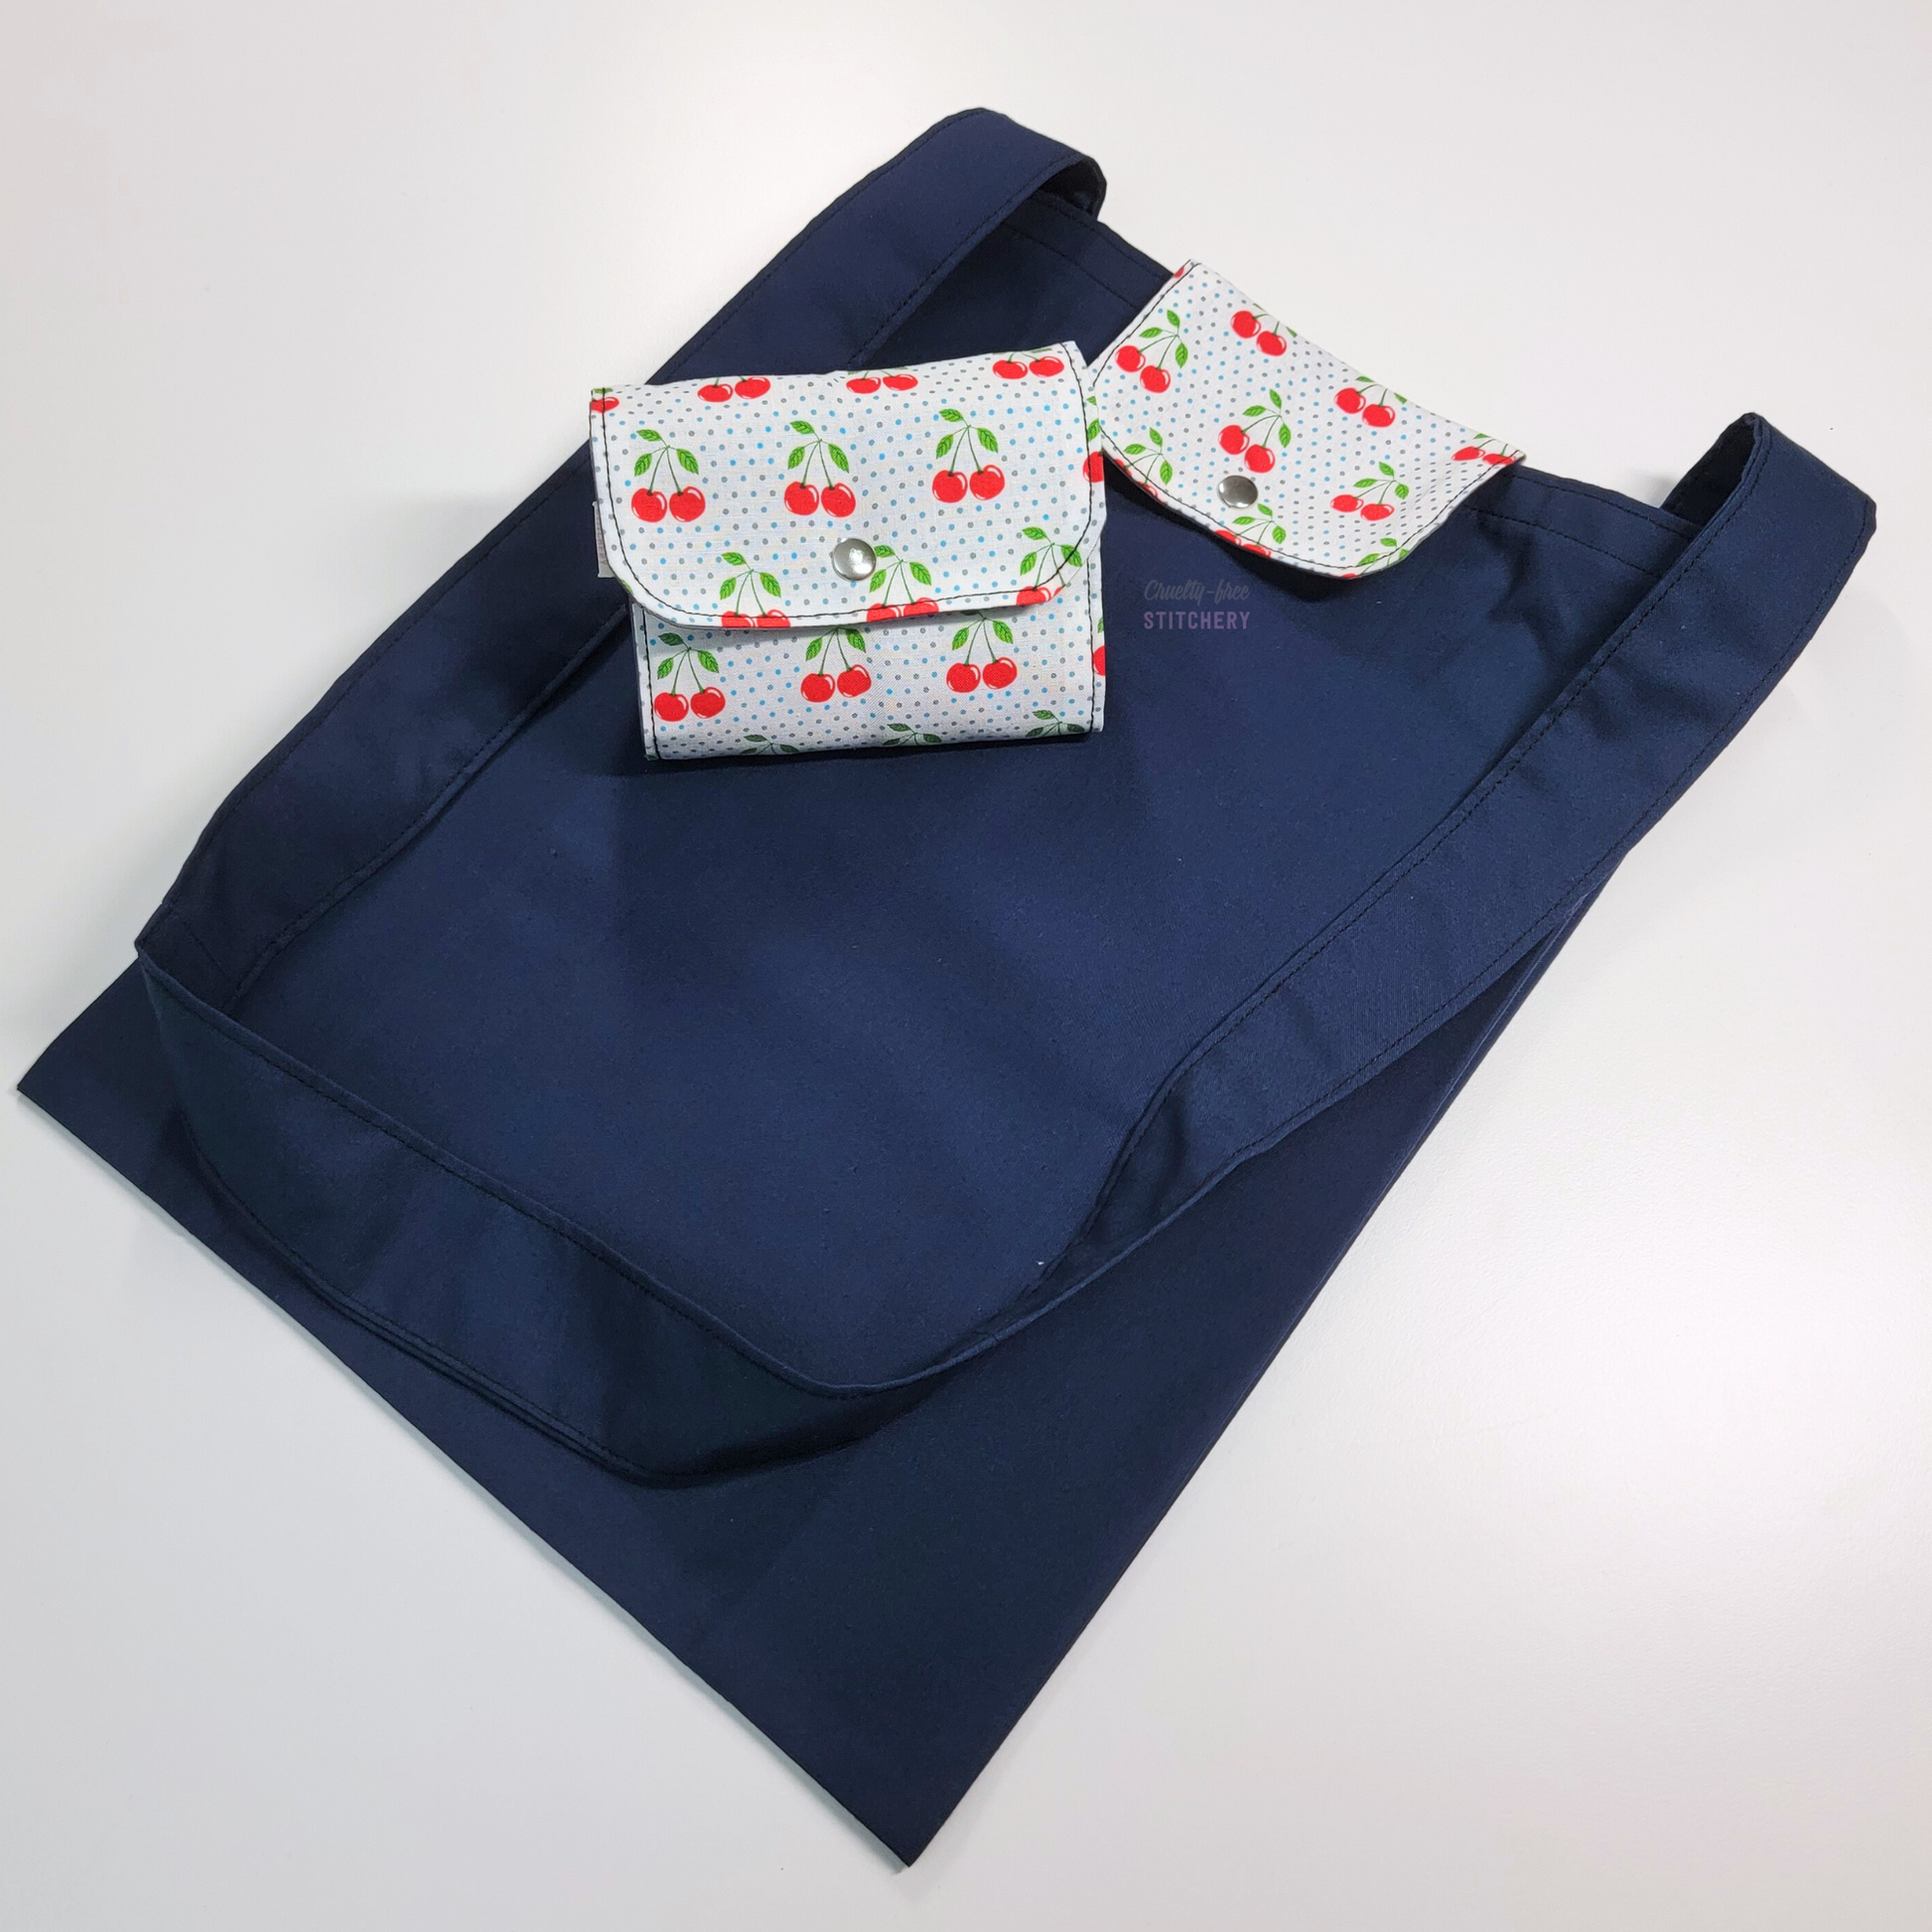 A navy blue tote bag with a long strap and a white flap with cherries and tiny blue polka dots. On top of the bag is another bag that has been folded up and snapped together like a wallet.